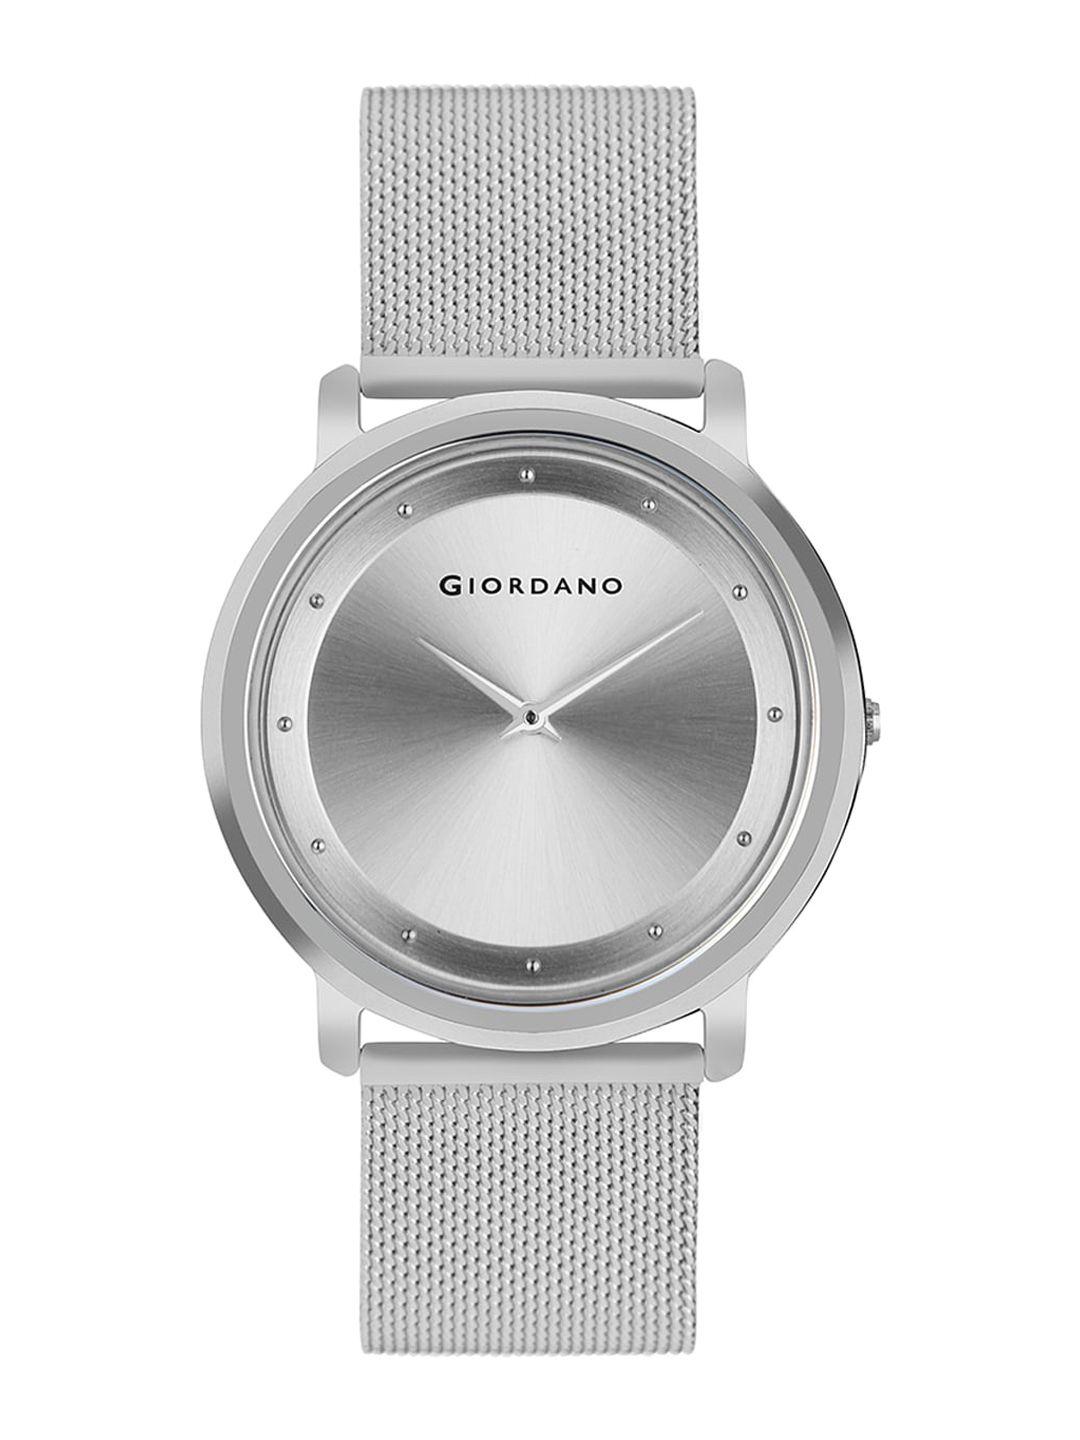 giordano-men-silver-toned-dial-&-silver-toned-straps-analogue-watch---gd4056-11-silver